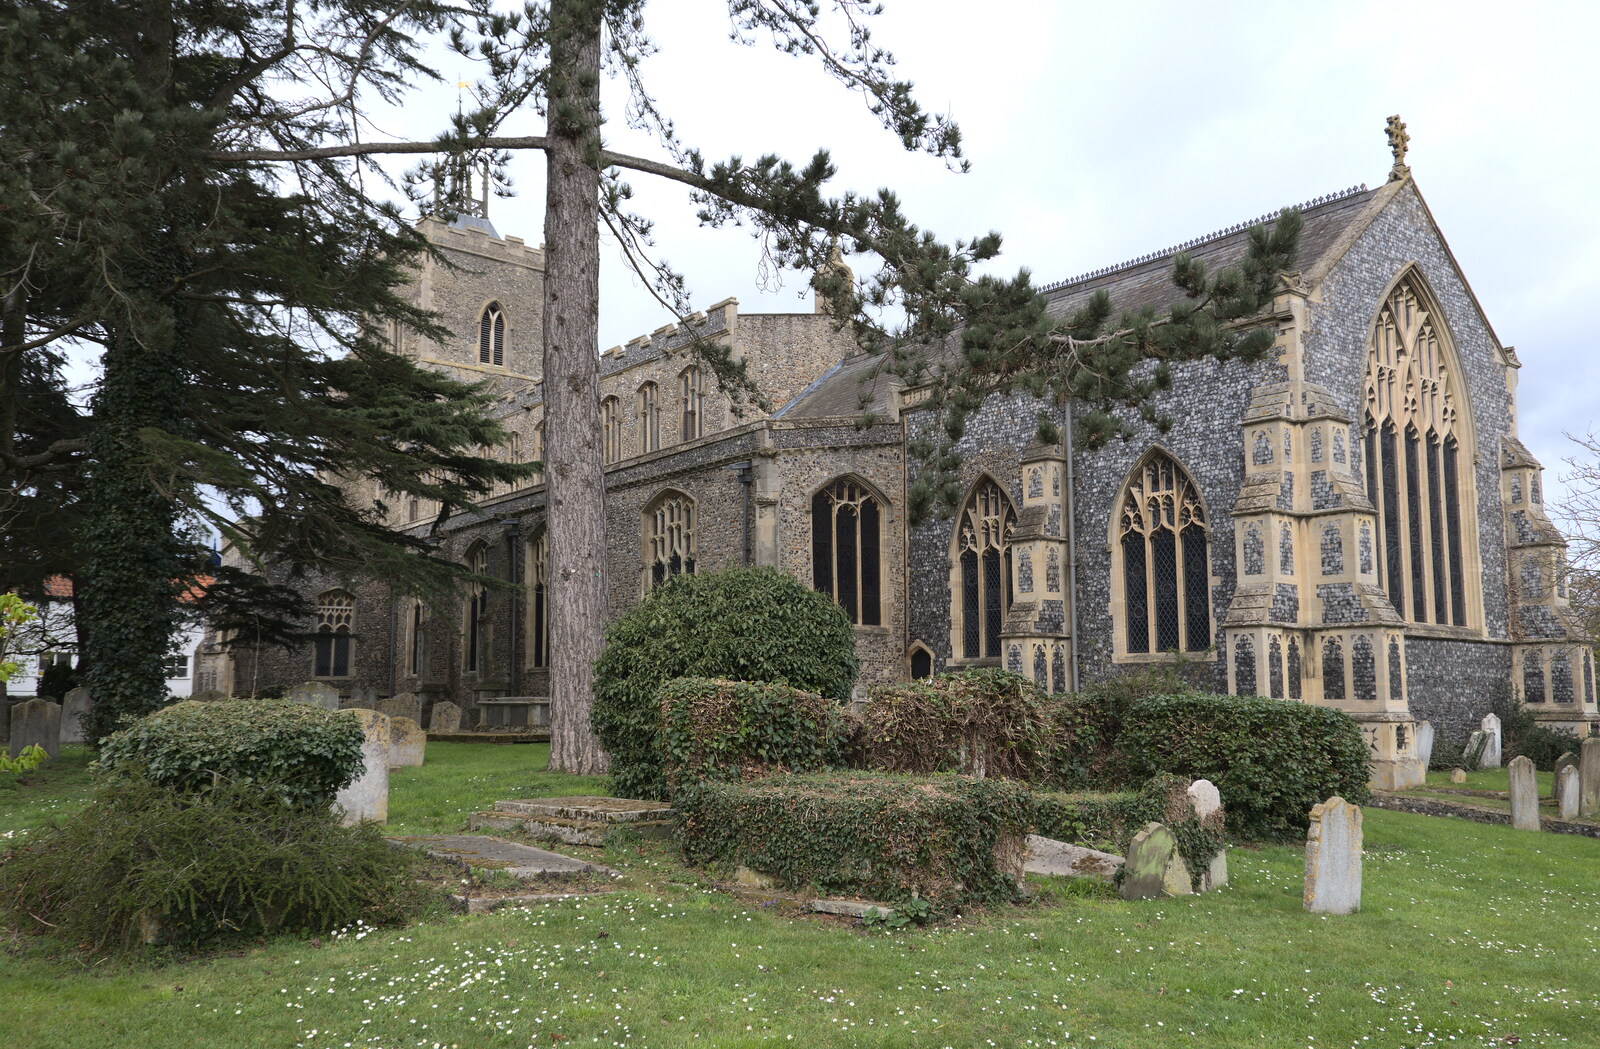 A Trip Down South, New Milton, Hampshire - 9th April 2022: St. Mary's church in Diss